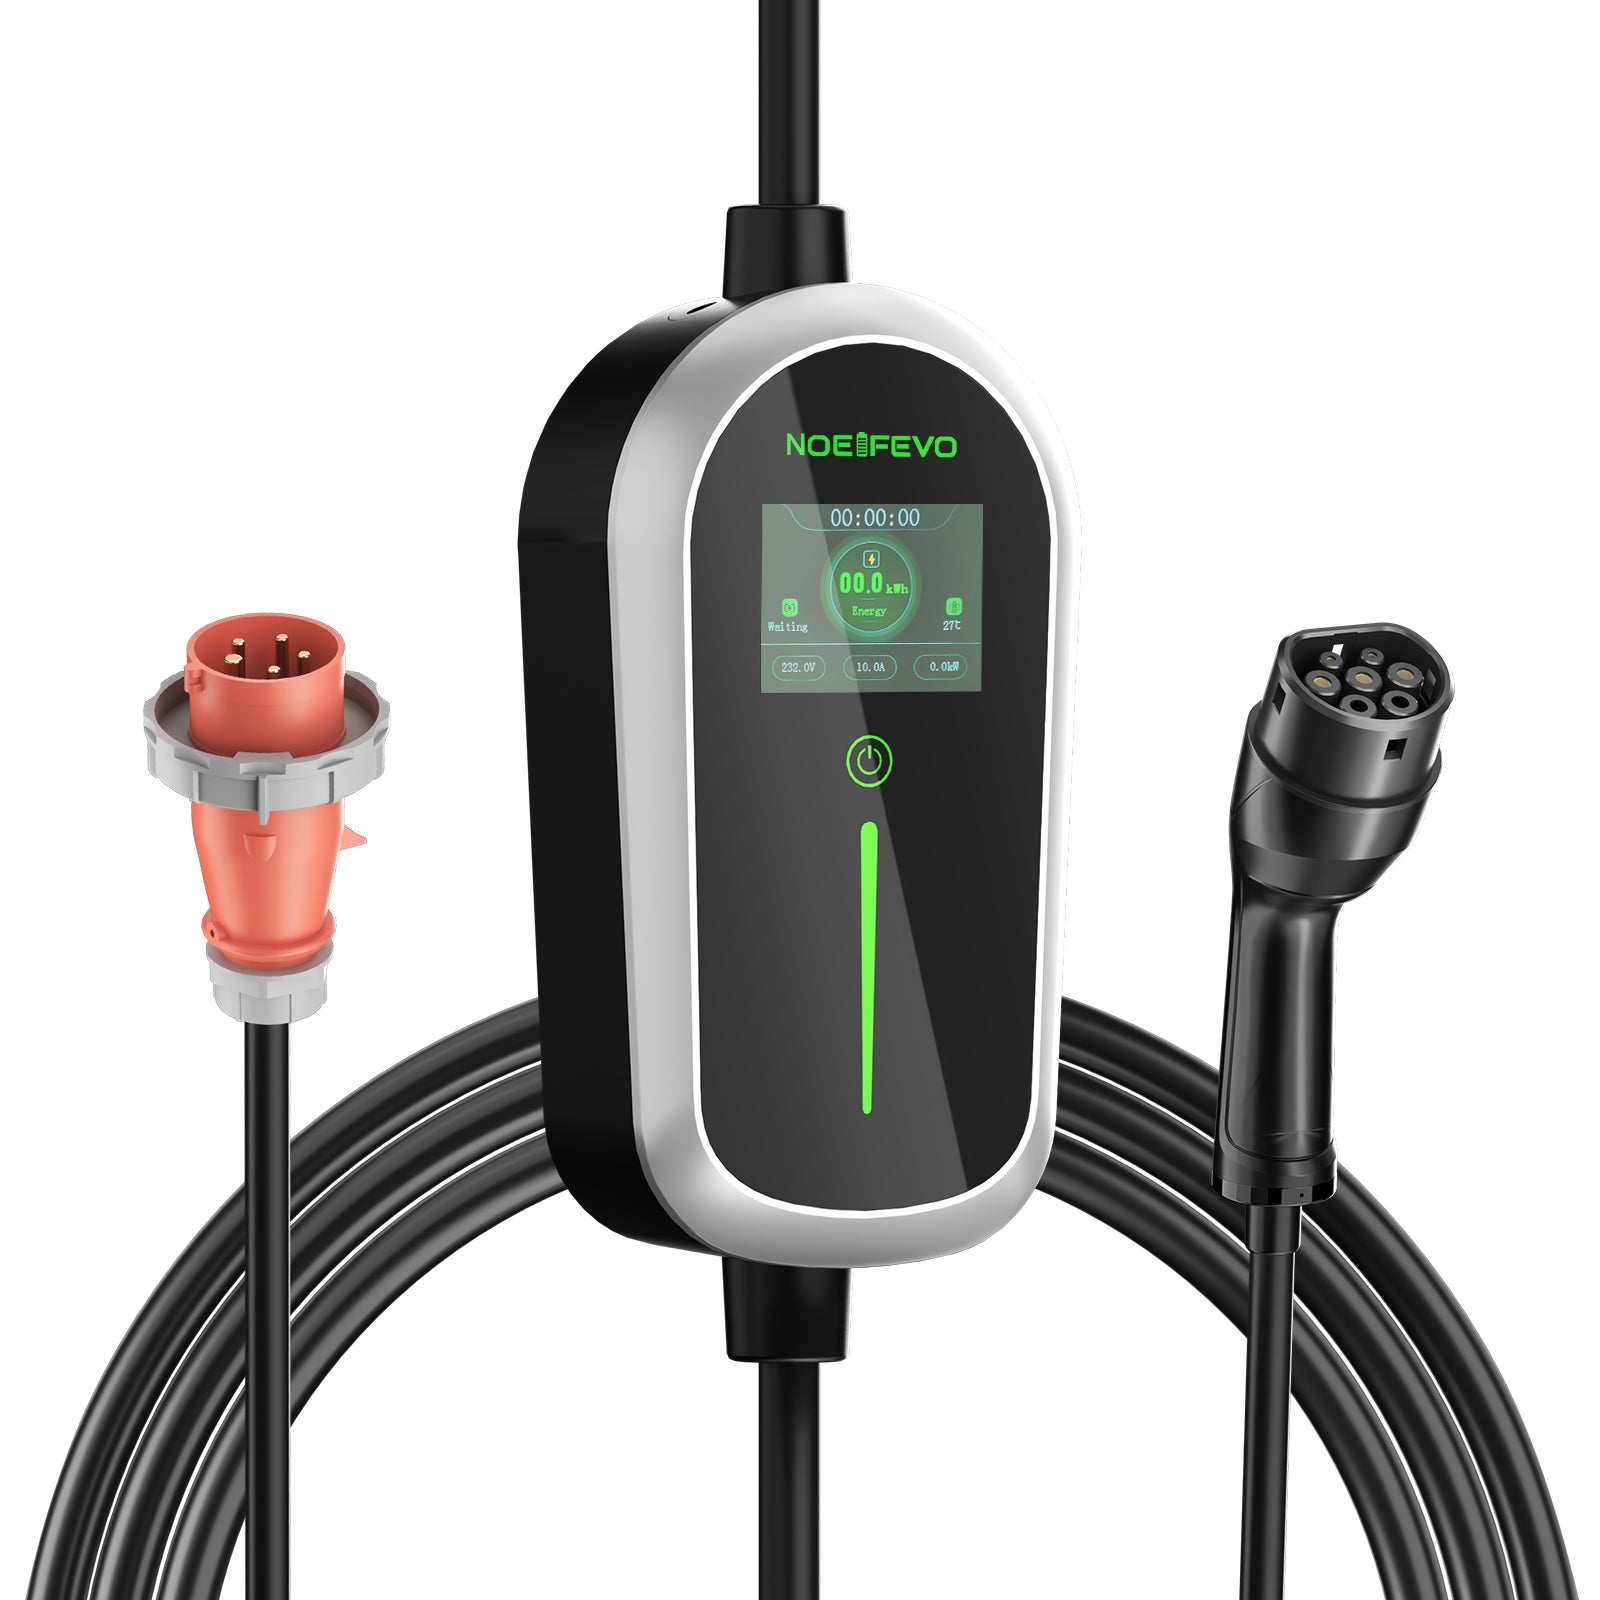 Noeifevo Power Fast Charging Cable 11kW 16A Type 2 to CEE EV Charger 5 – Smart  LifePO4 Batterie & Heimspeicherung von Energie & Intelligentes Ladegerät, ev  type 2 charging cable 11kw 